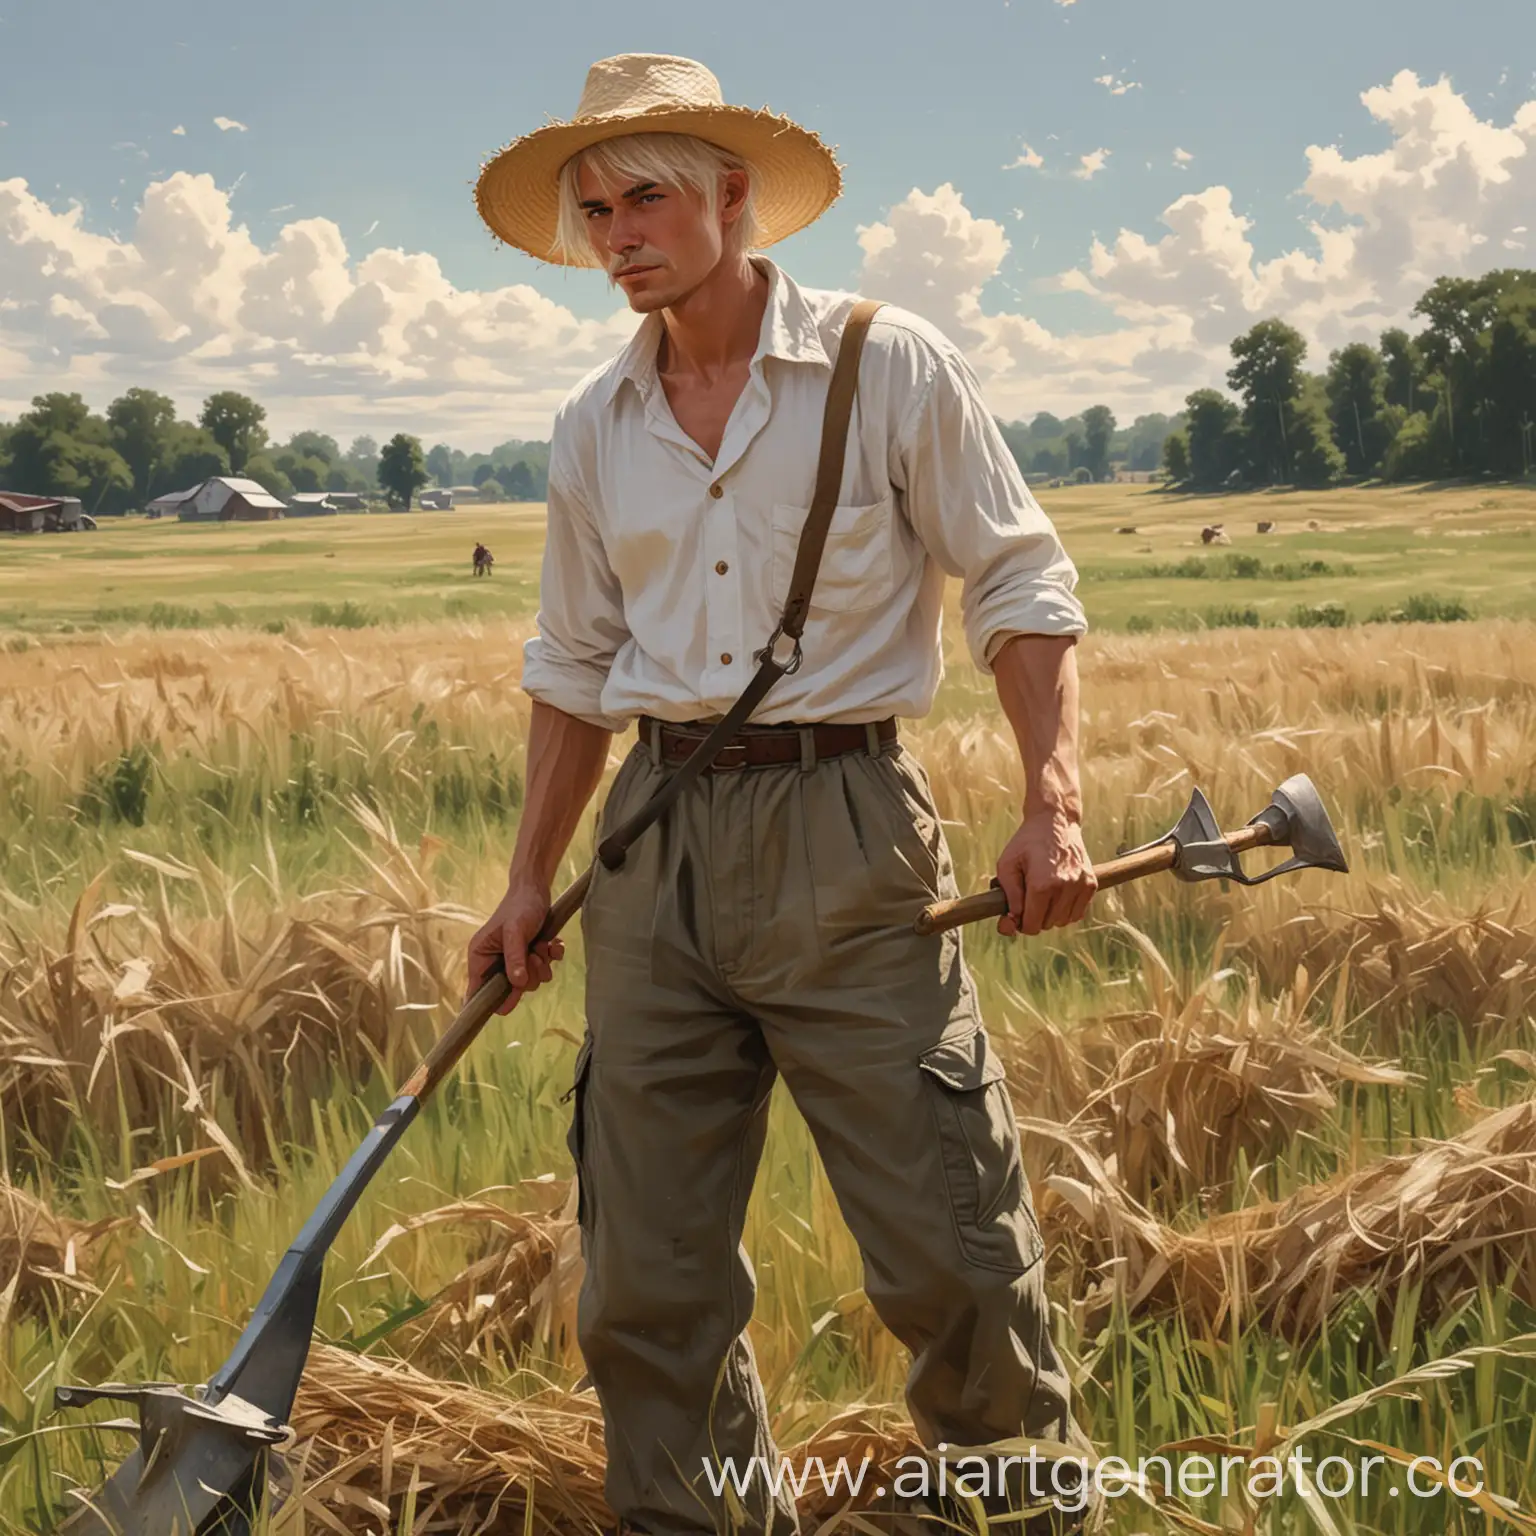 Man-Aggressively-Mowing-Field-with-Scythe-Intense-Farming-Action